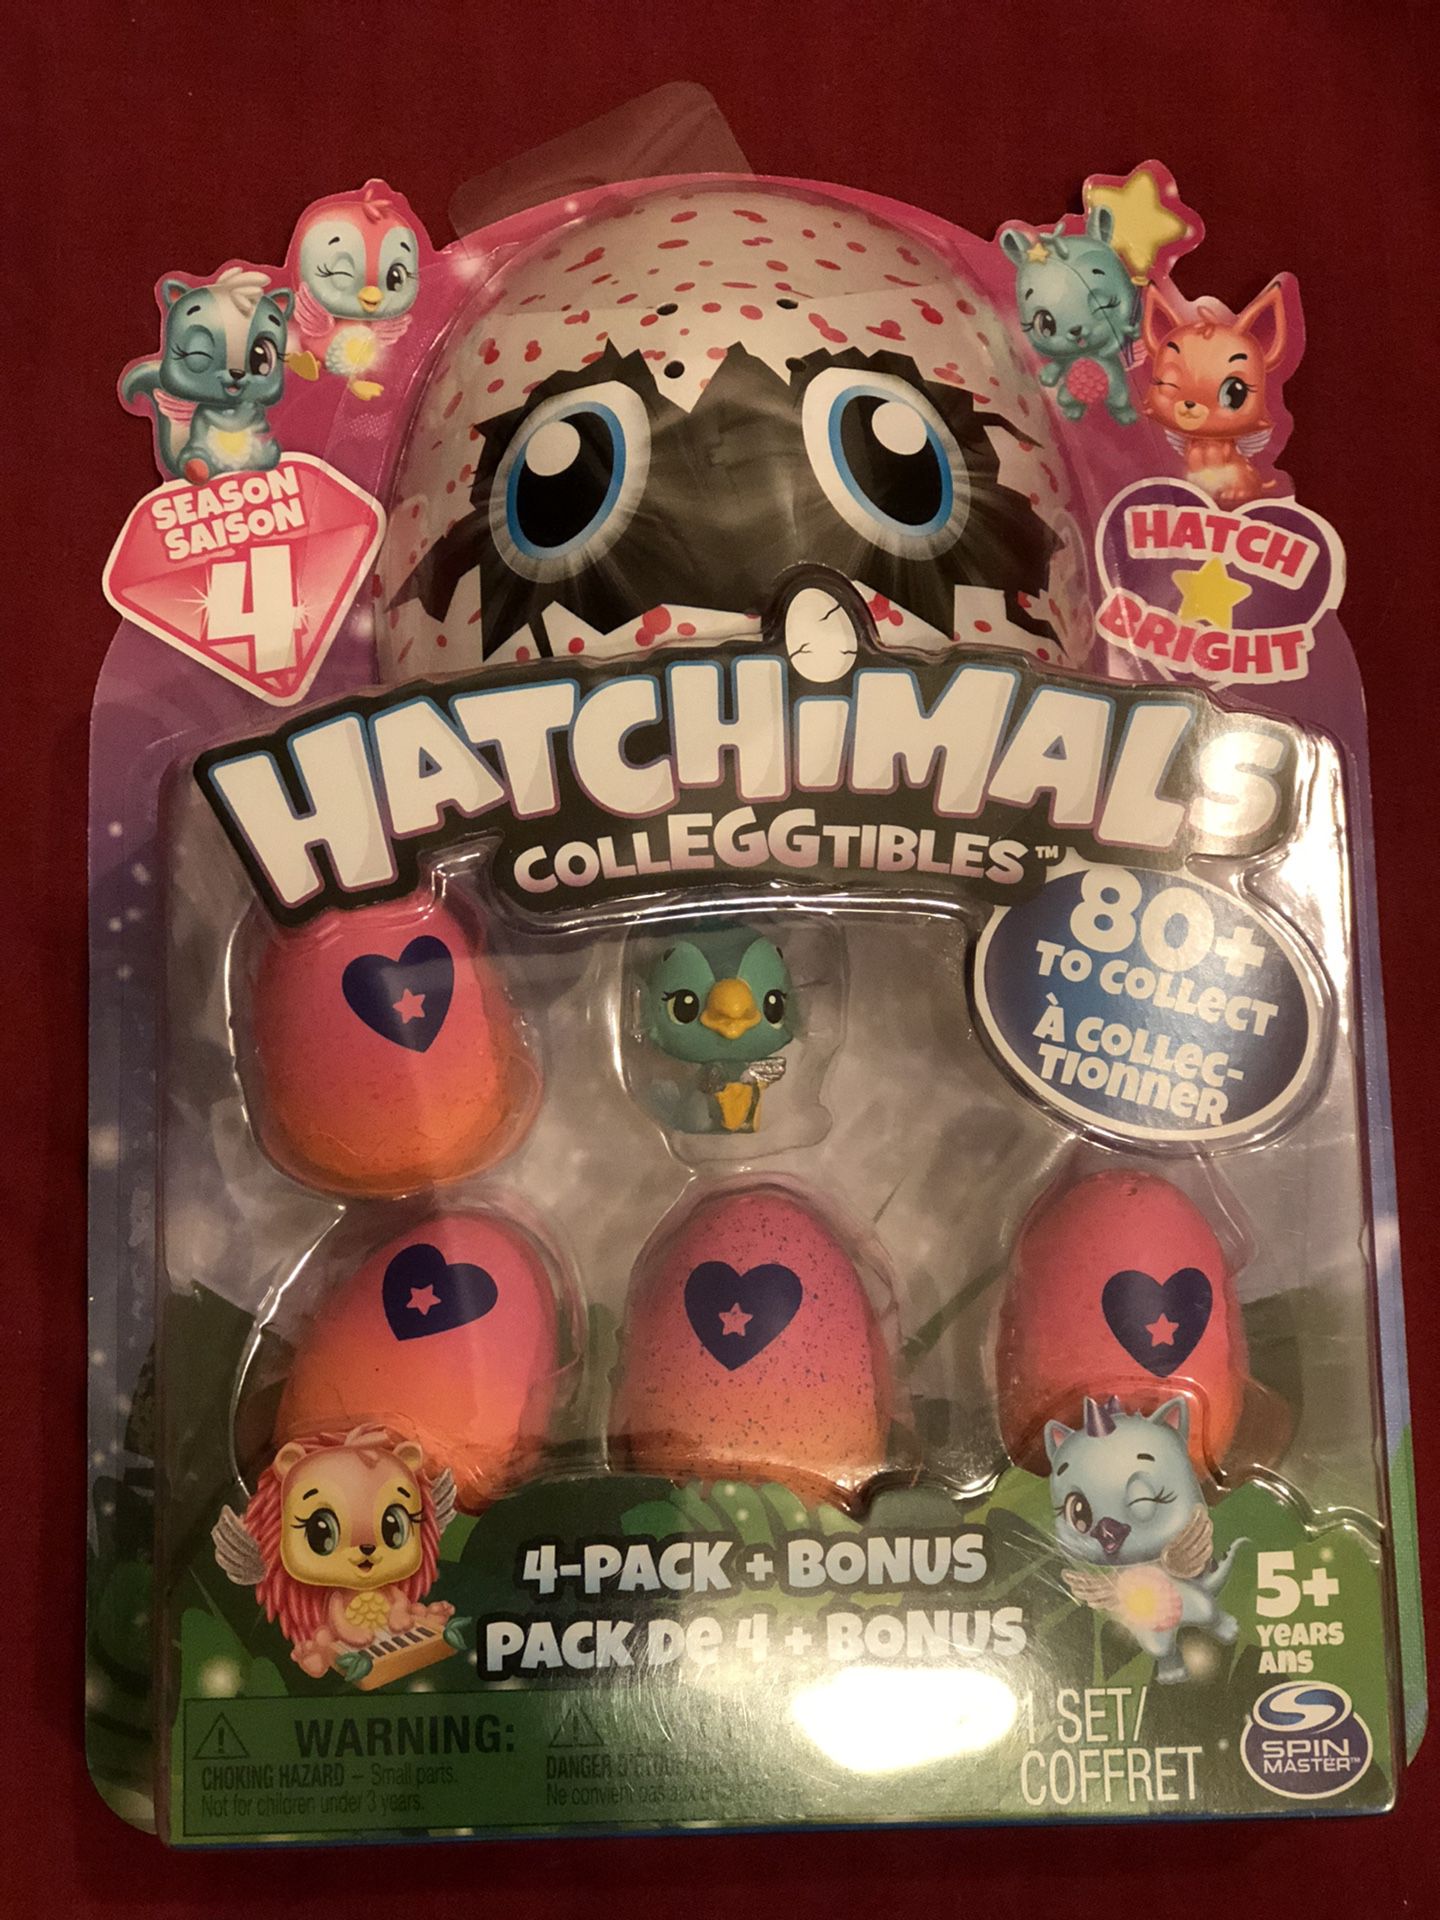 Hatchimals CollEGGtibles, 4 Pack + Bonus, Season 4 Hatchimals CollEGGtible, for Ages 5 and Up 